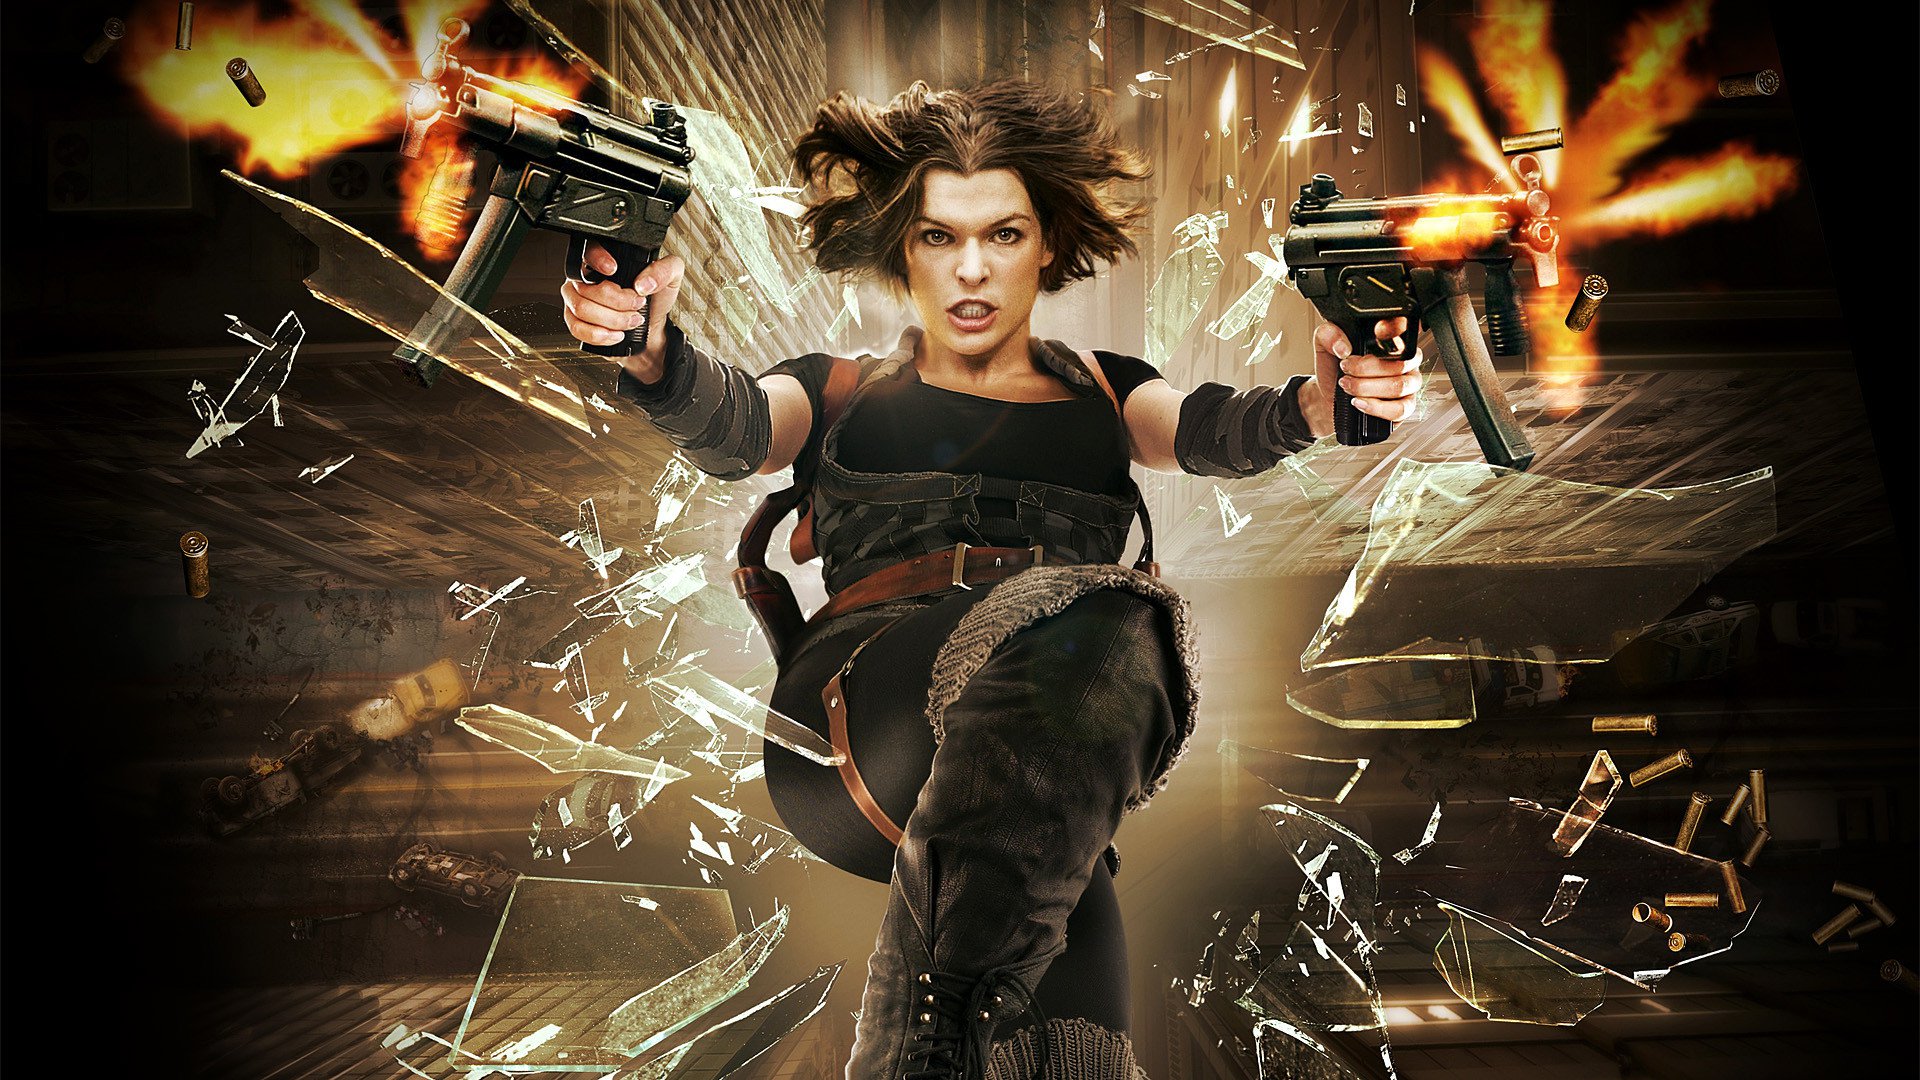 Resident Evil: The Final Chapter Teaser Trailer and Exclusive